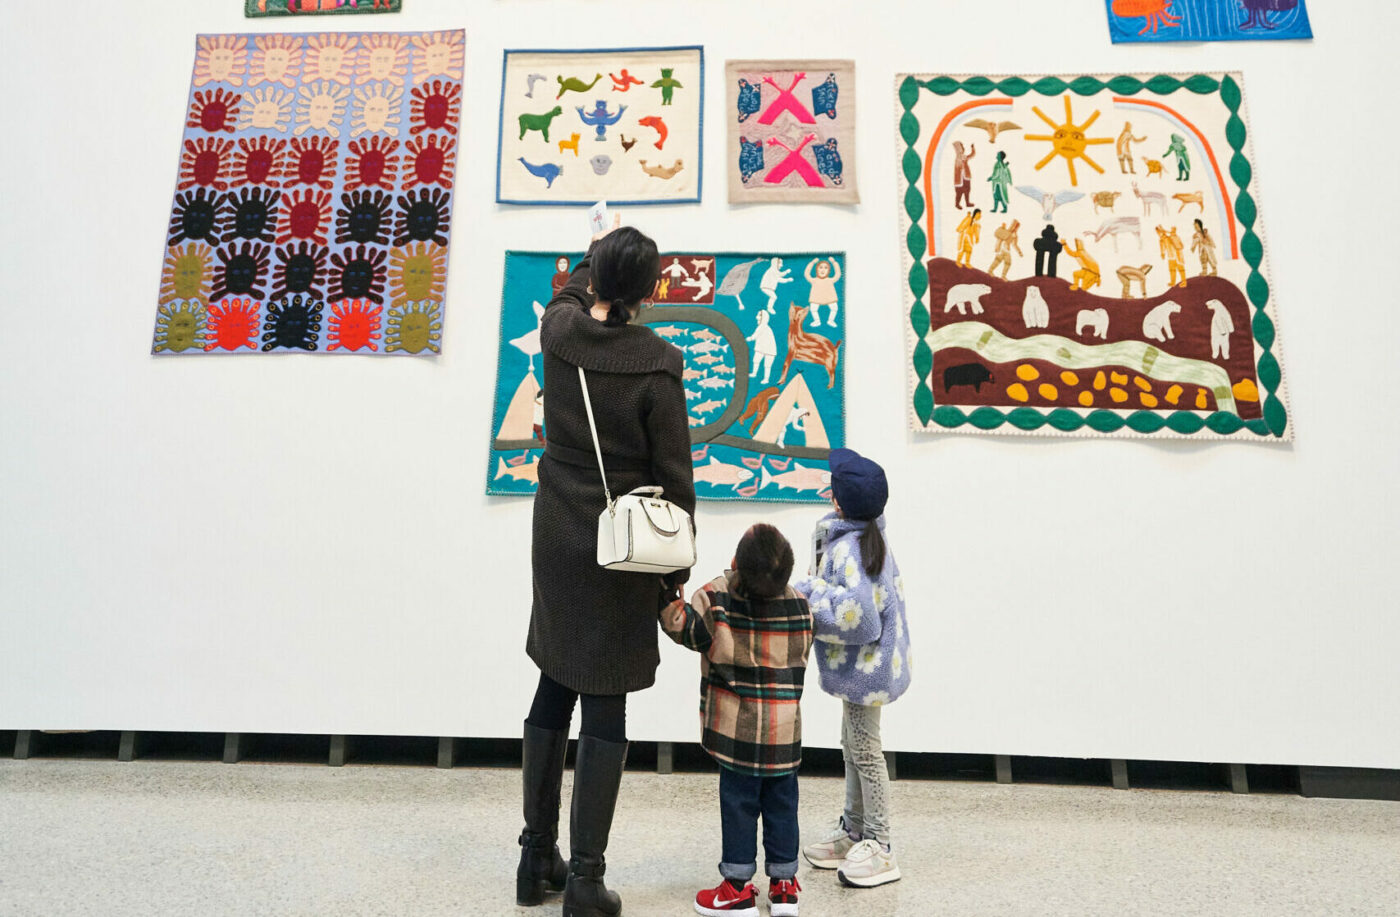 A family stands and looks at art in the Winnipeg Art Gallery-Qaumajuq.